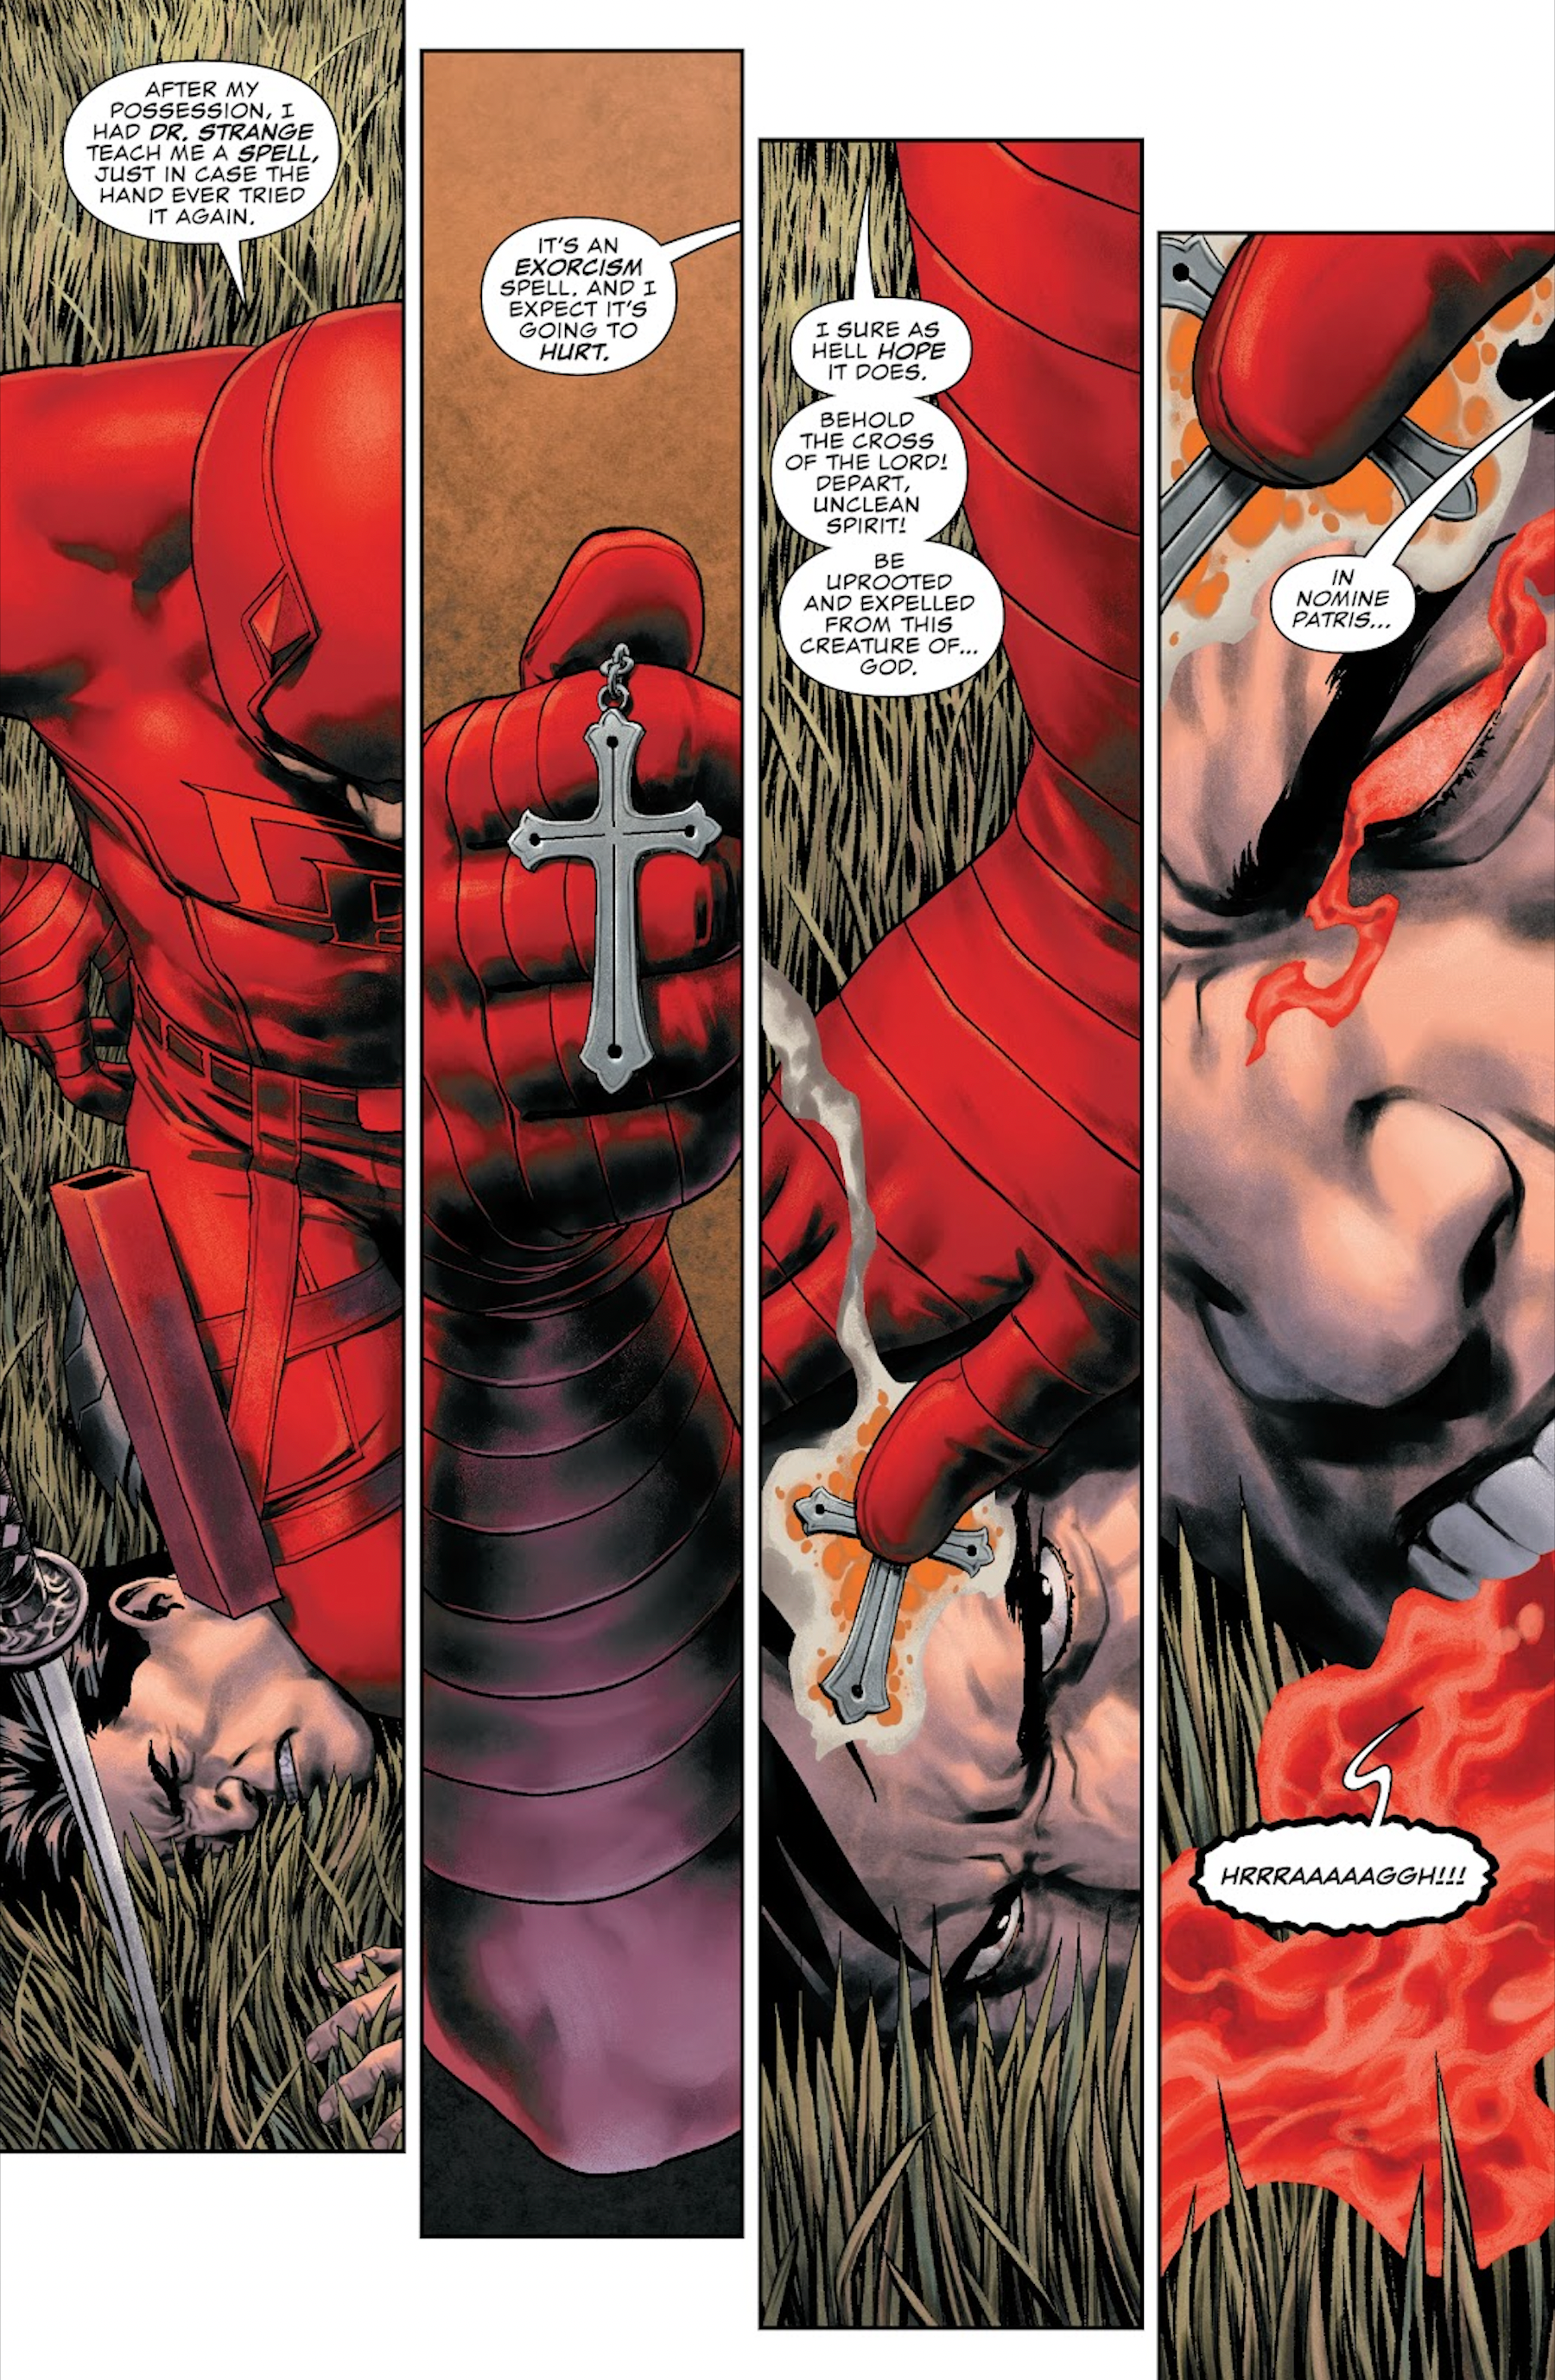 Daredevil performs an exorcism on Punisher